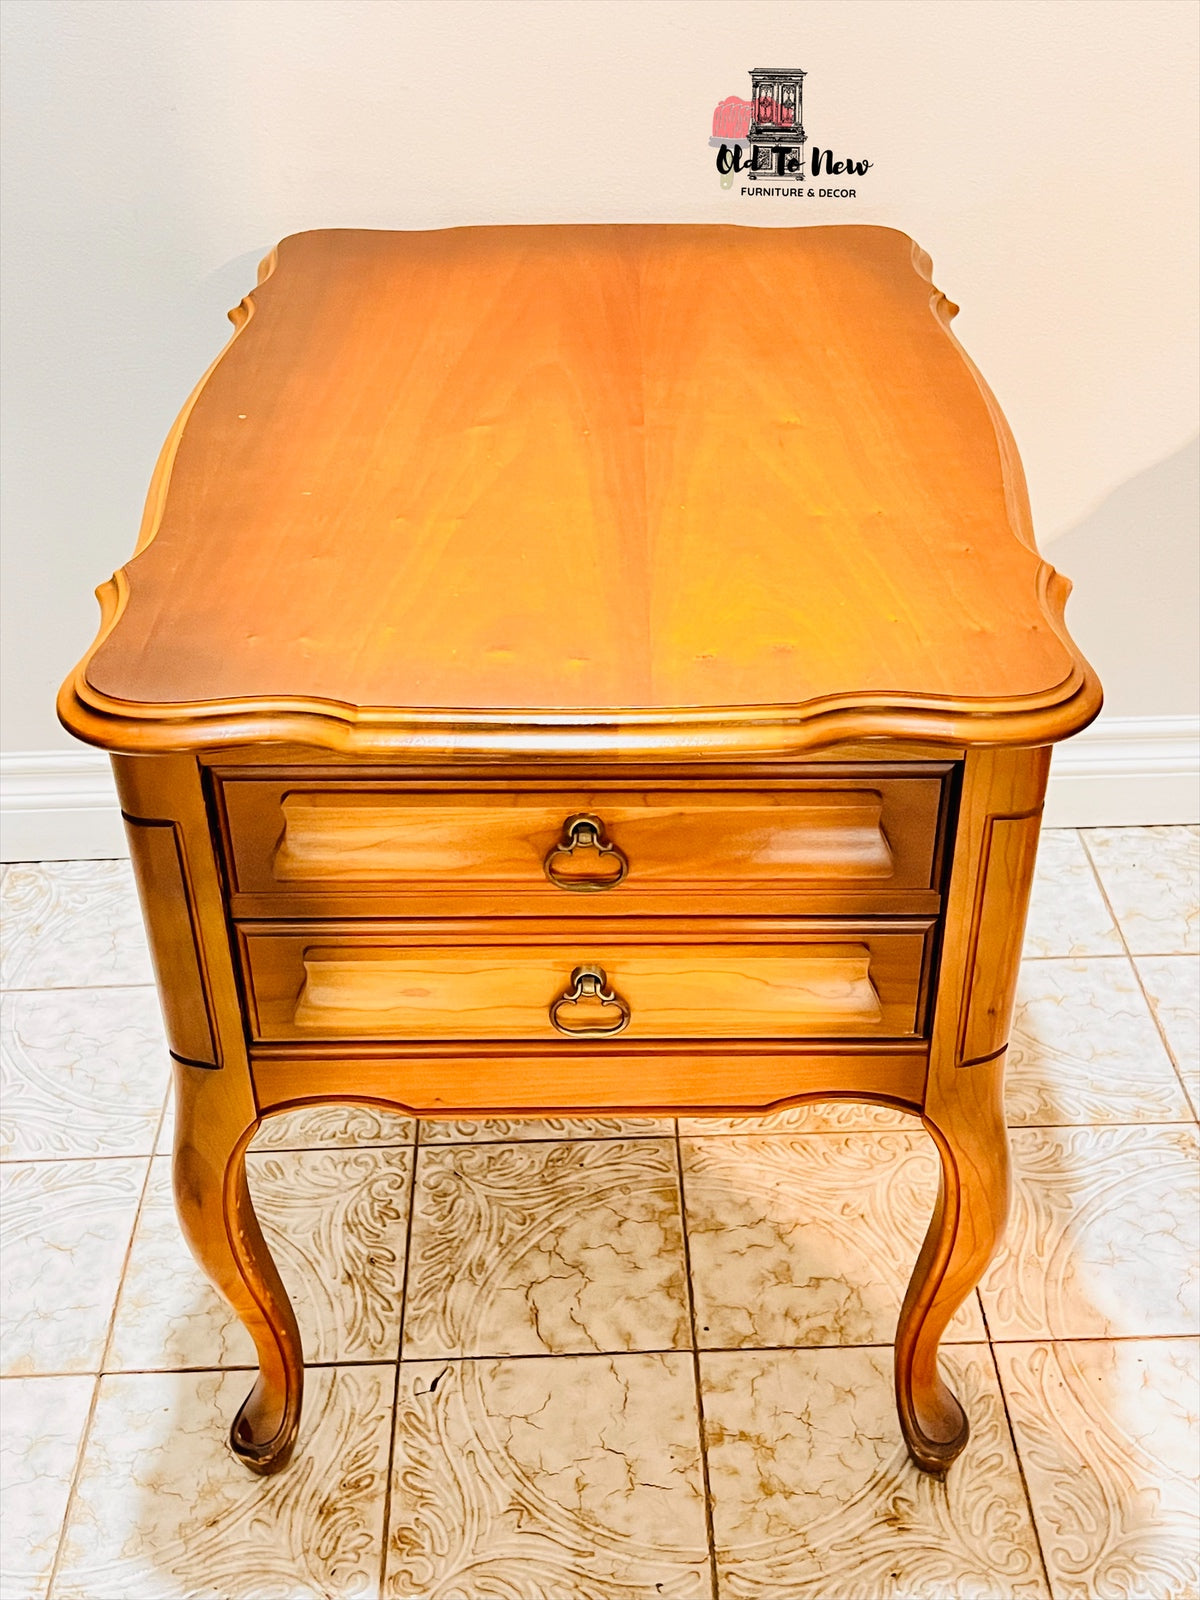 Unfinished French Provincial End Tables; Choose Your Paint Color and Customize These Wood End Tables.